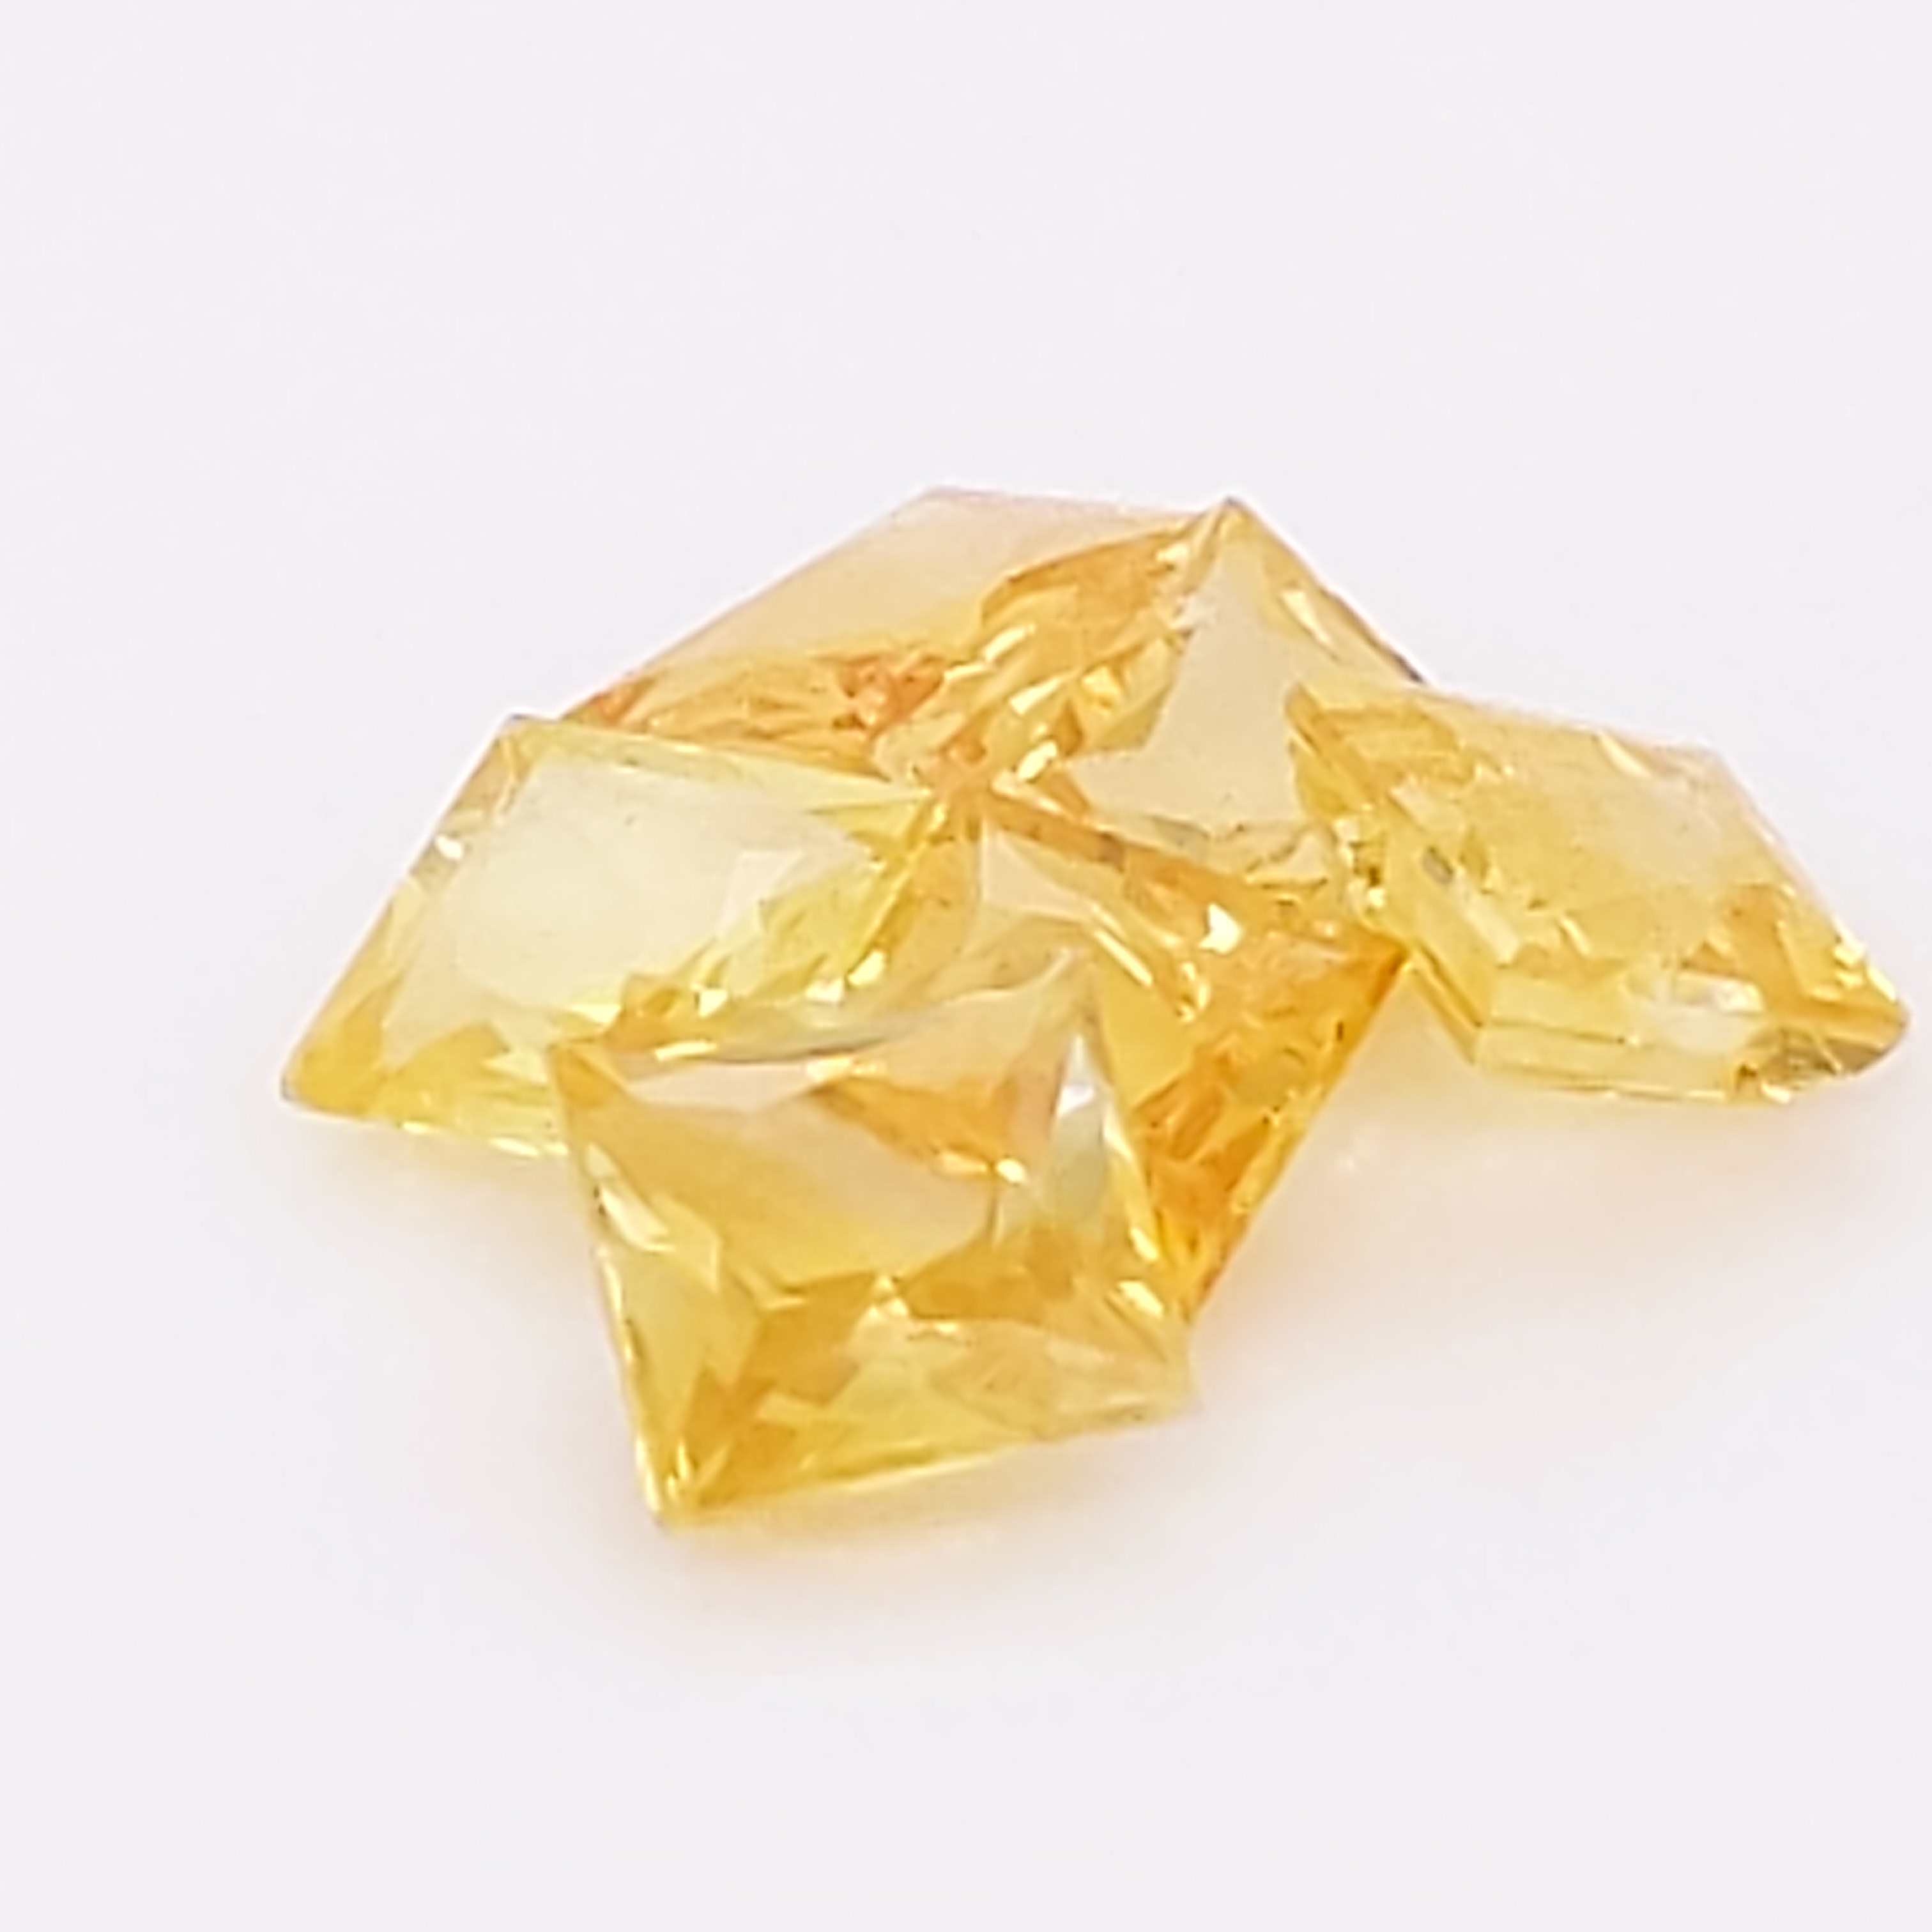 Square Yellow Sapphires 6 stones ~4mm each 1.99 Carats Total - Simply ...